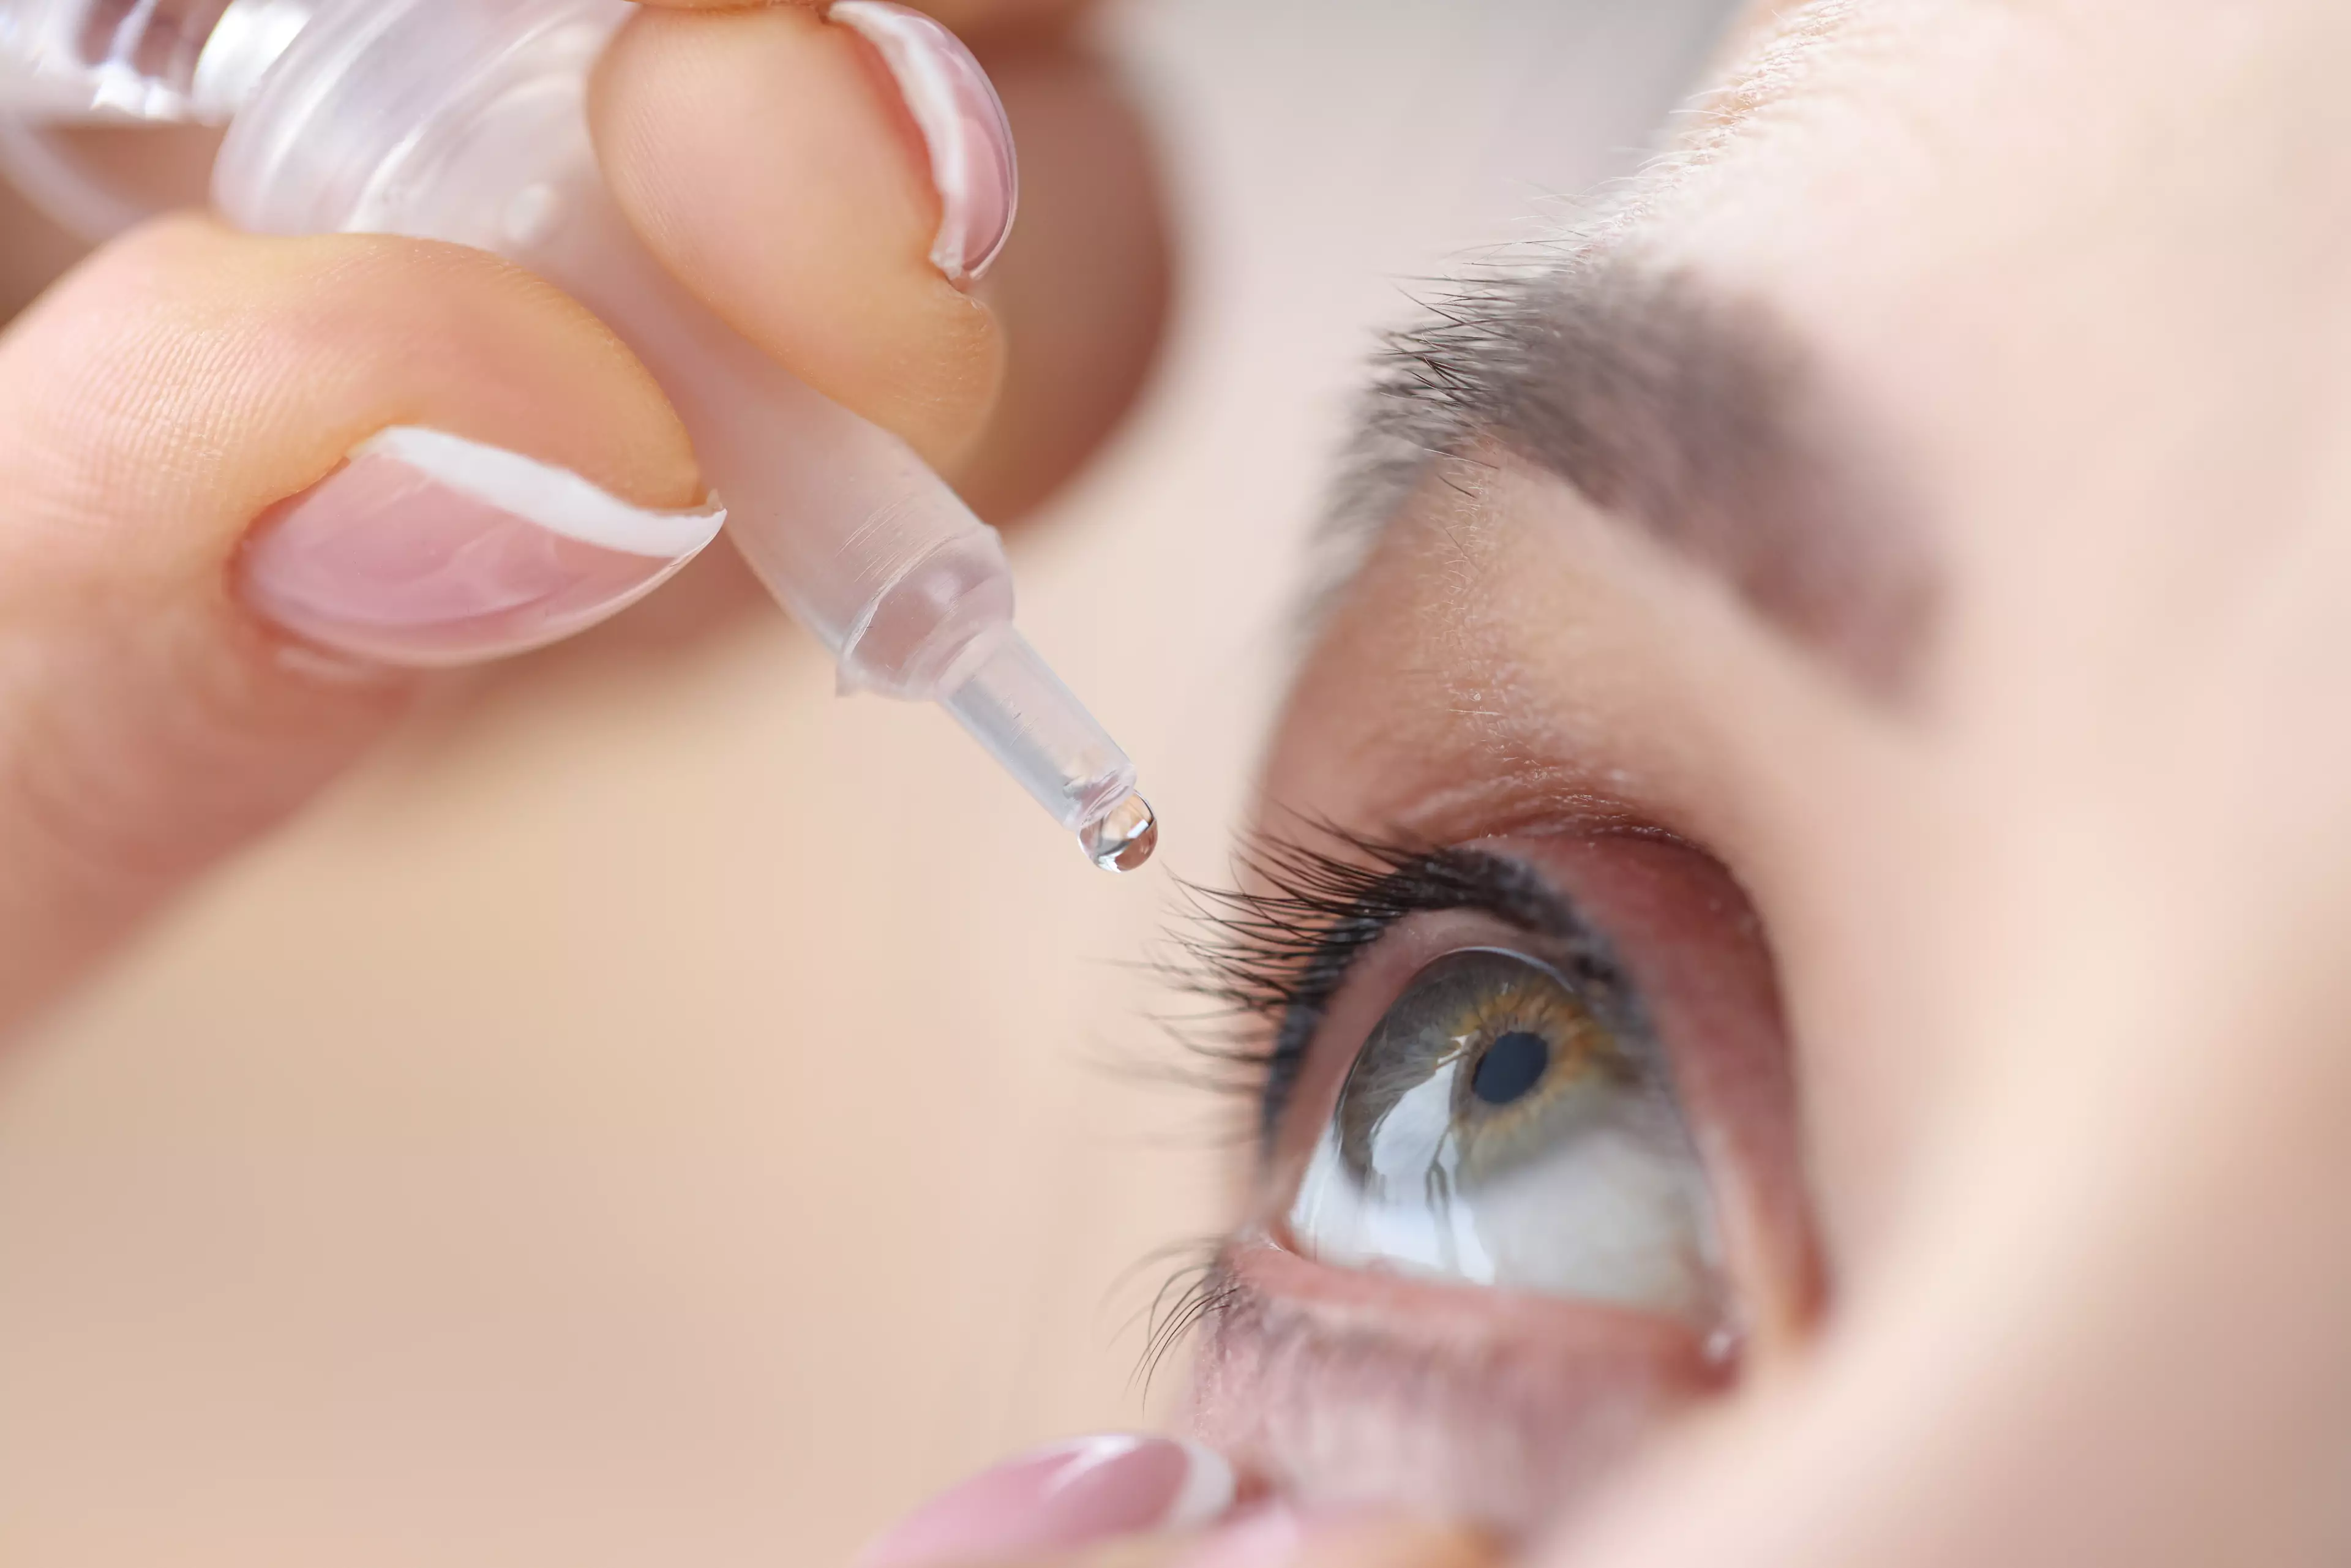 Eye drops can help lubricate your eyes (